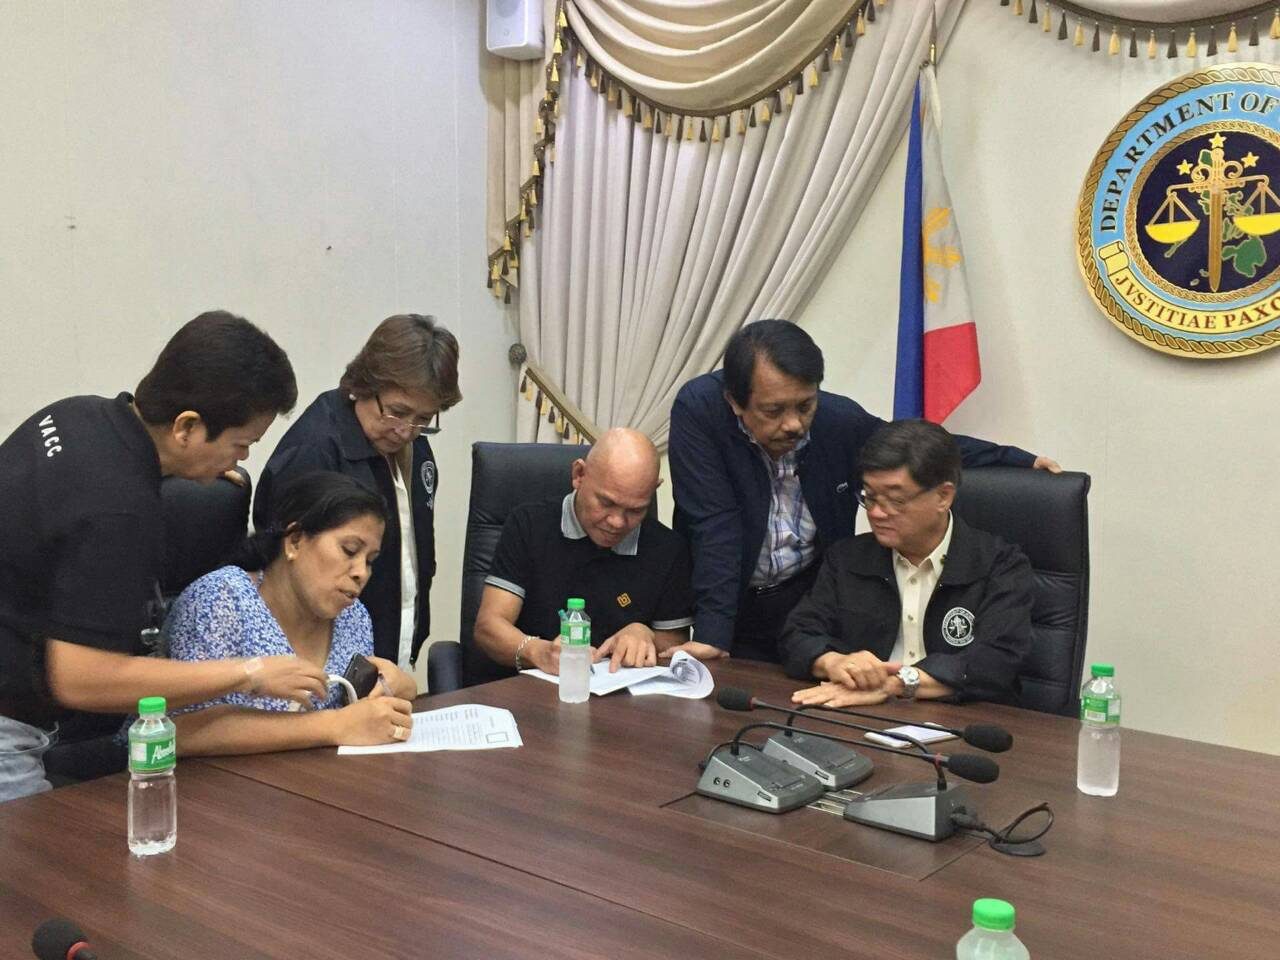 APPLICATION. Lorenza and Saldy delos Santos apply for the Witness Protection Program of the Department of Justice on August 29, 2017. With them is Justice Secretary Alexander Aguirre II and Dante Jimenez, president of the Volunteers Against Crime and Corruption (VACC). Photo courtesy of the DOJ  